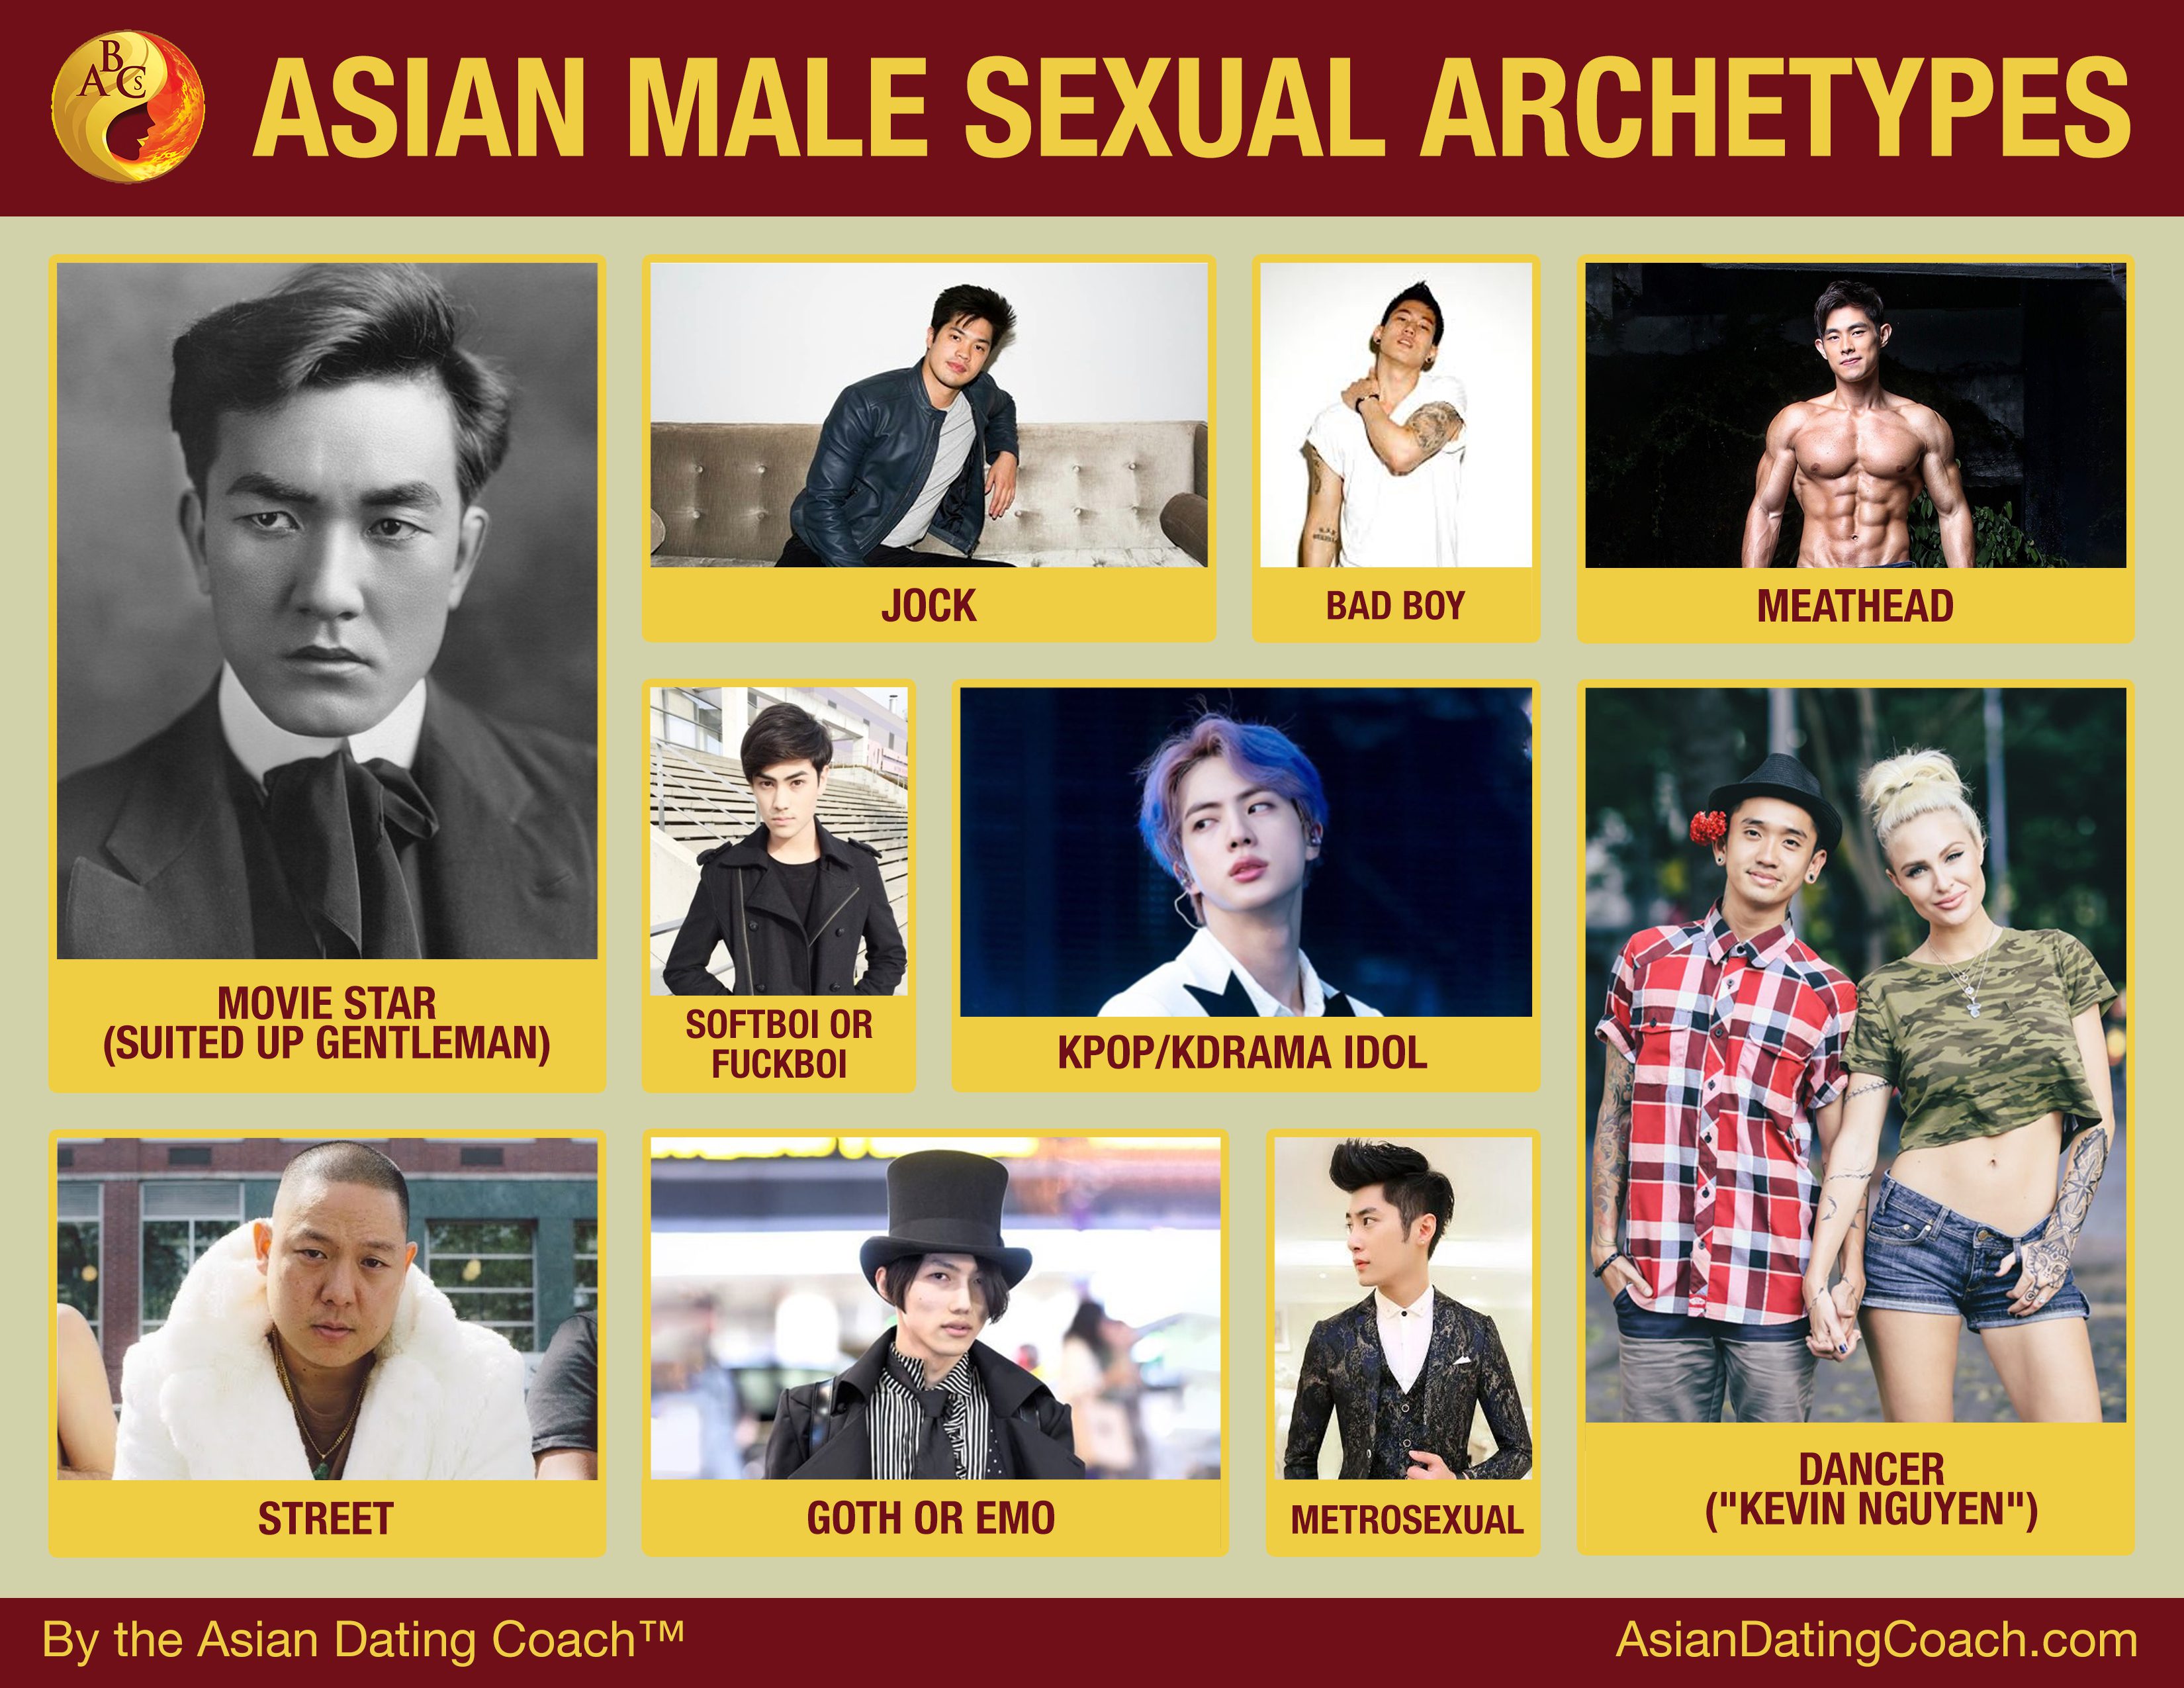 Alternative Forms of Valid Asian Masculine Sexual Identities (From Upper Left to Right): Movie Star (Suited Up Gentleman), Jock, Badboy, Meathead, Softboi or Fuckboi, Kpop / KDrama Idol, Street, Emo or Goth, Metrosexual, and Dancer (a "Kevin Nguyen")